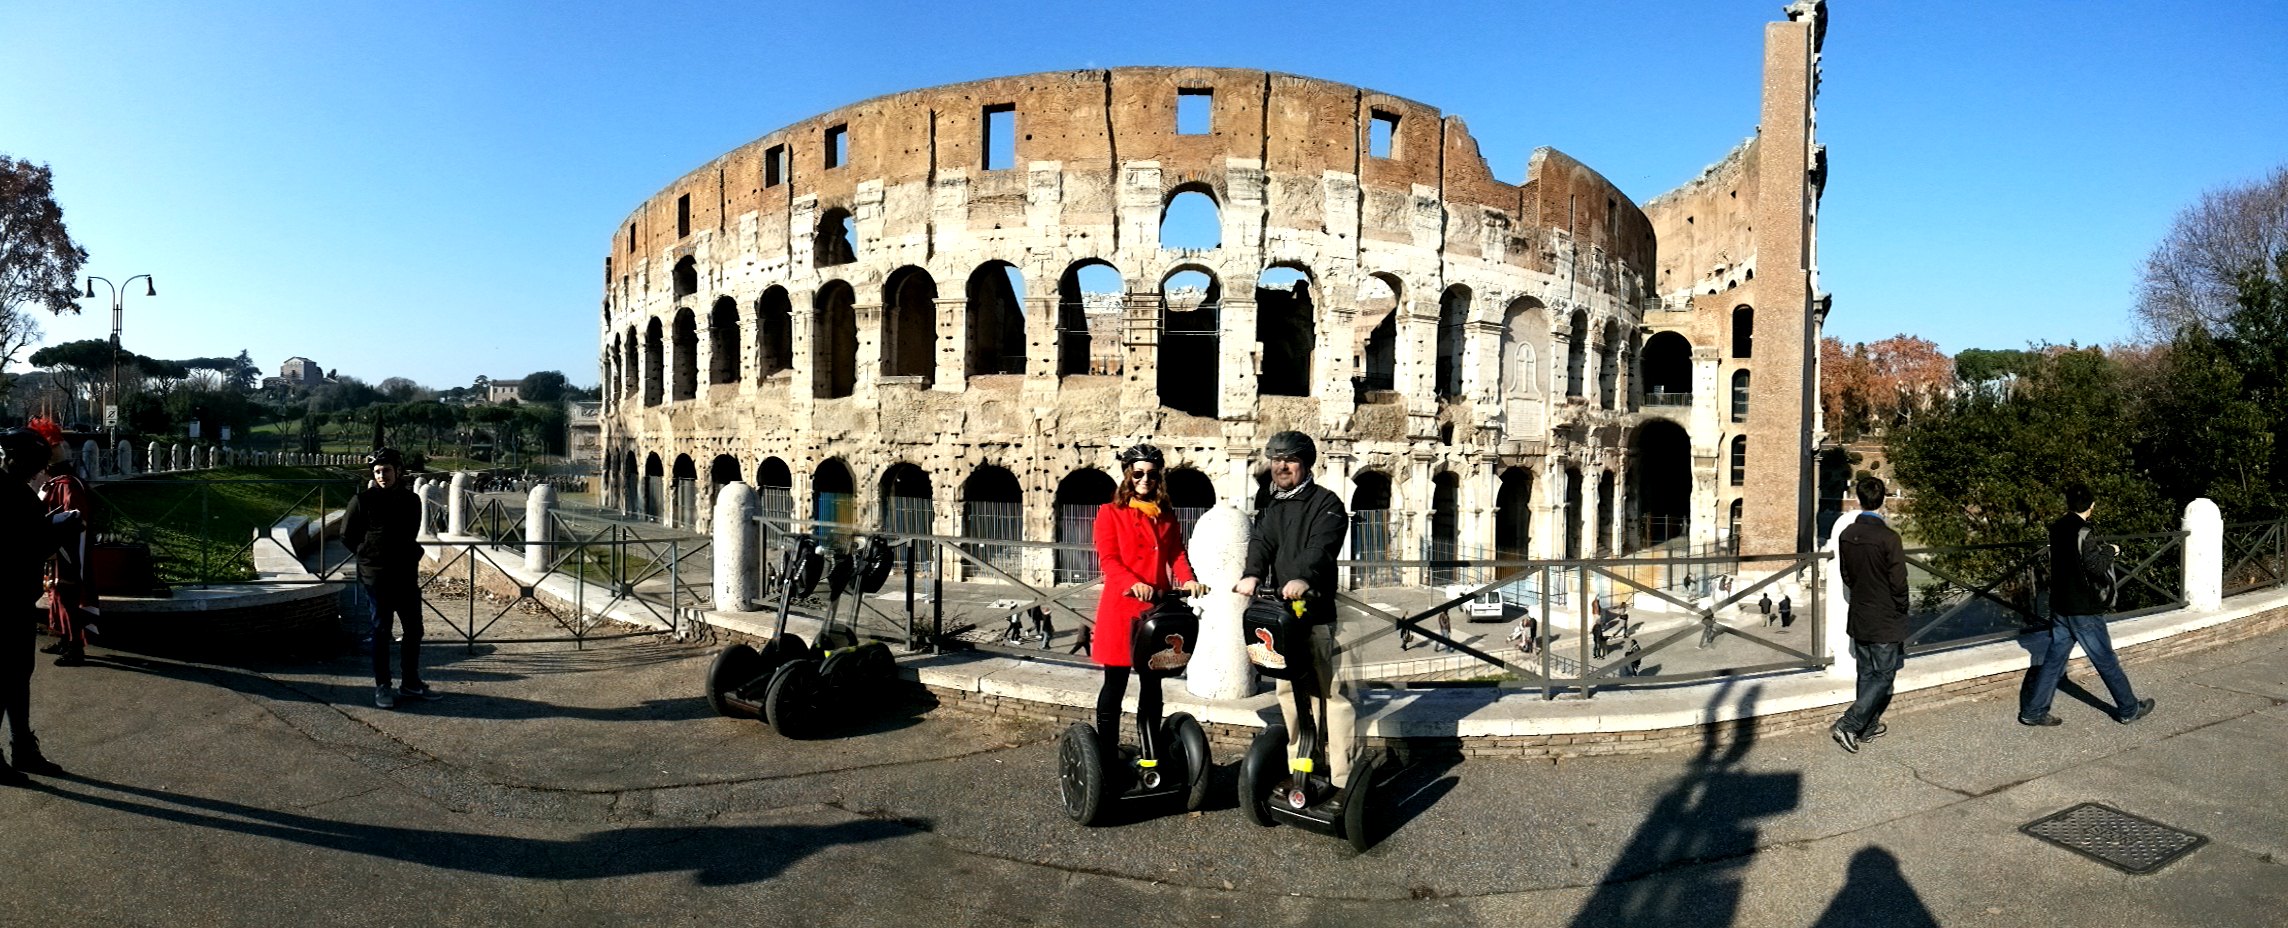 Segway joy at the Colosseum.